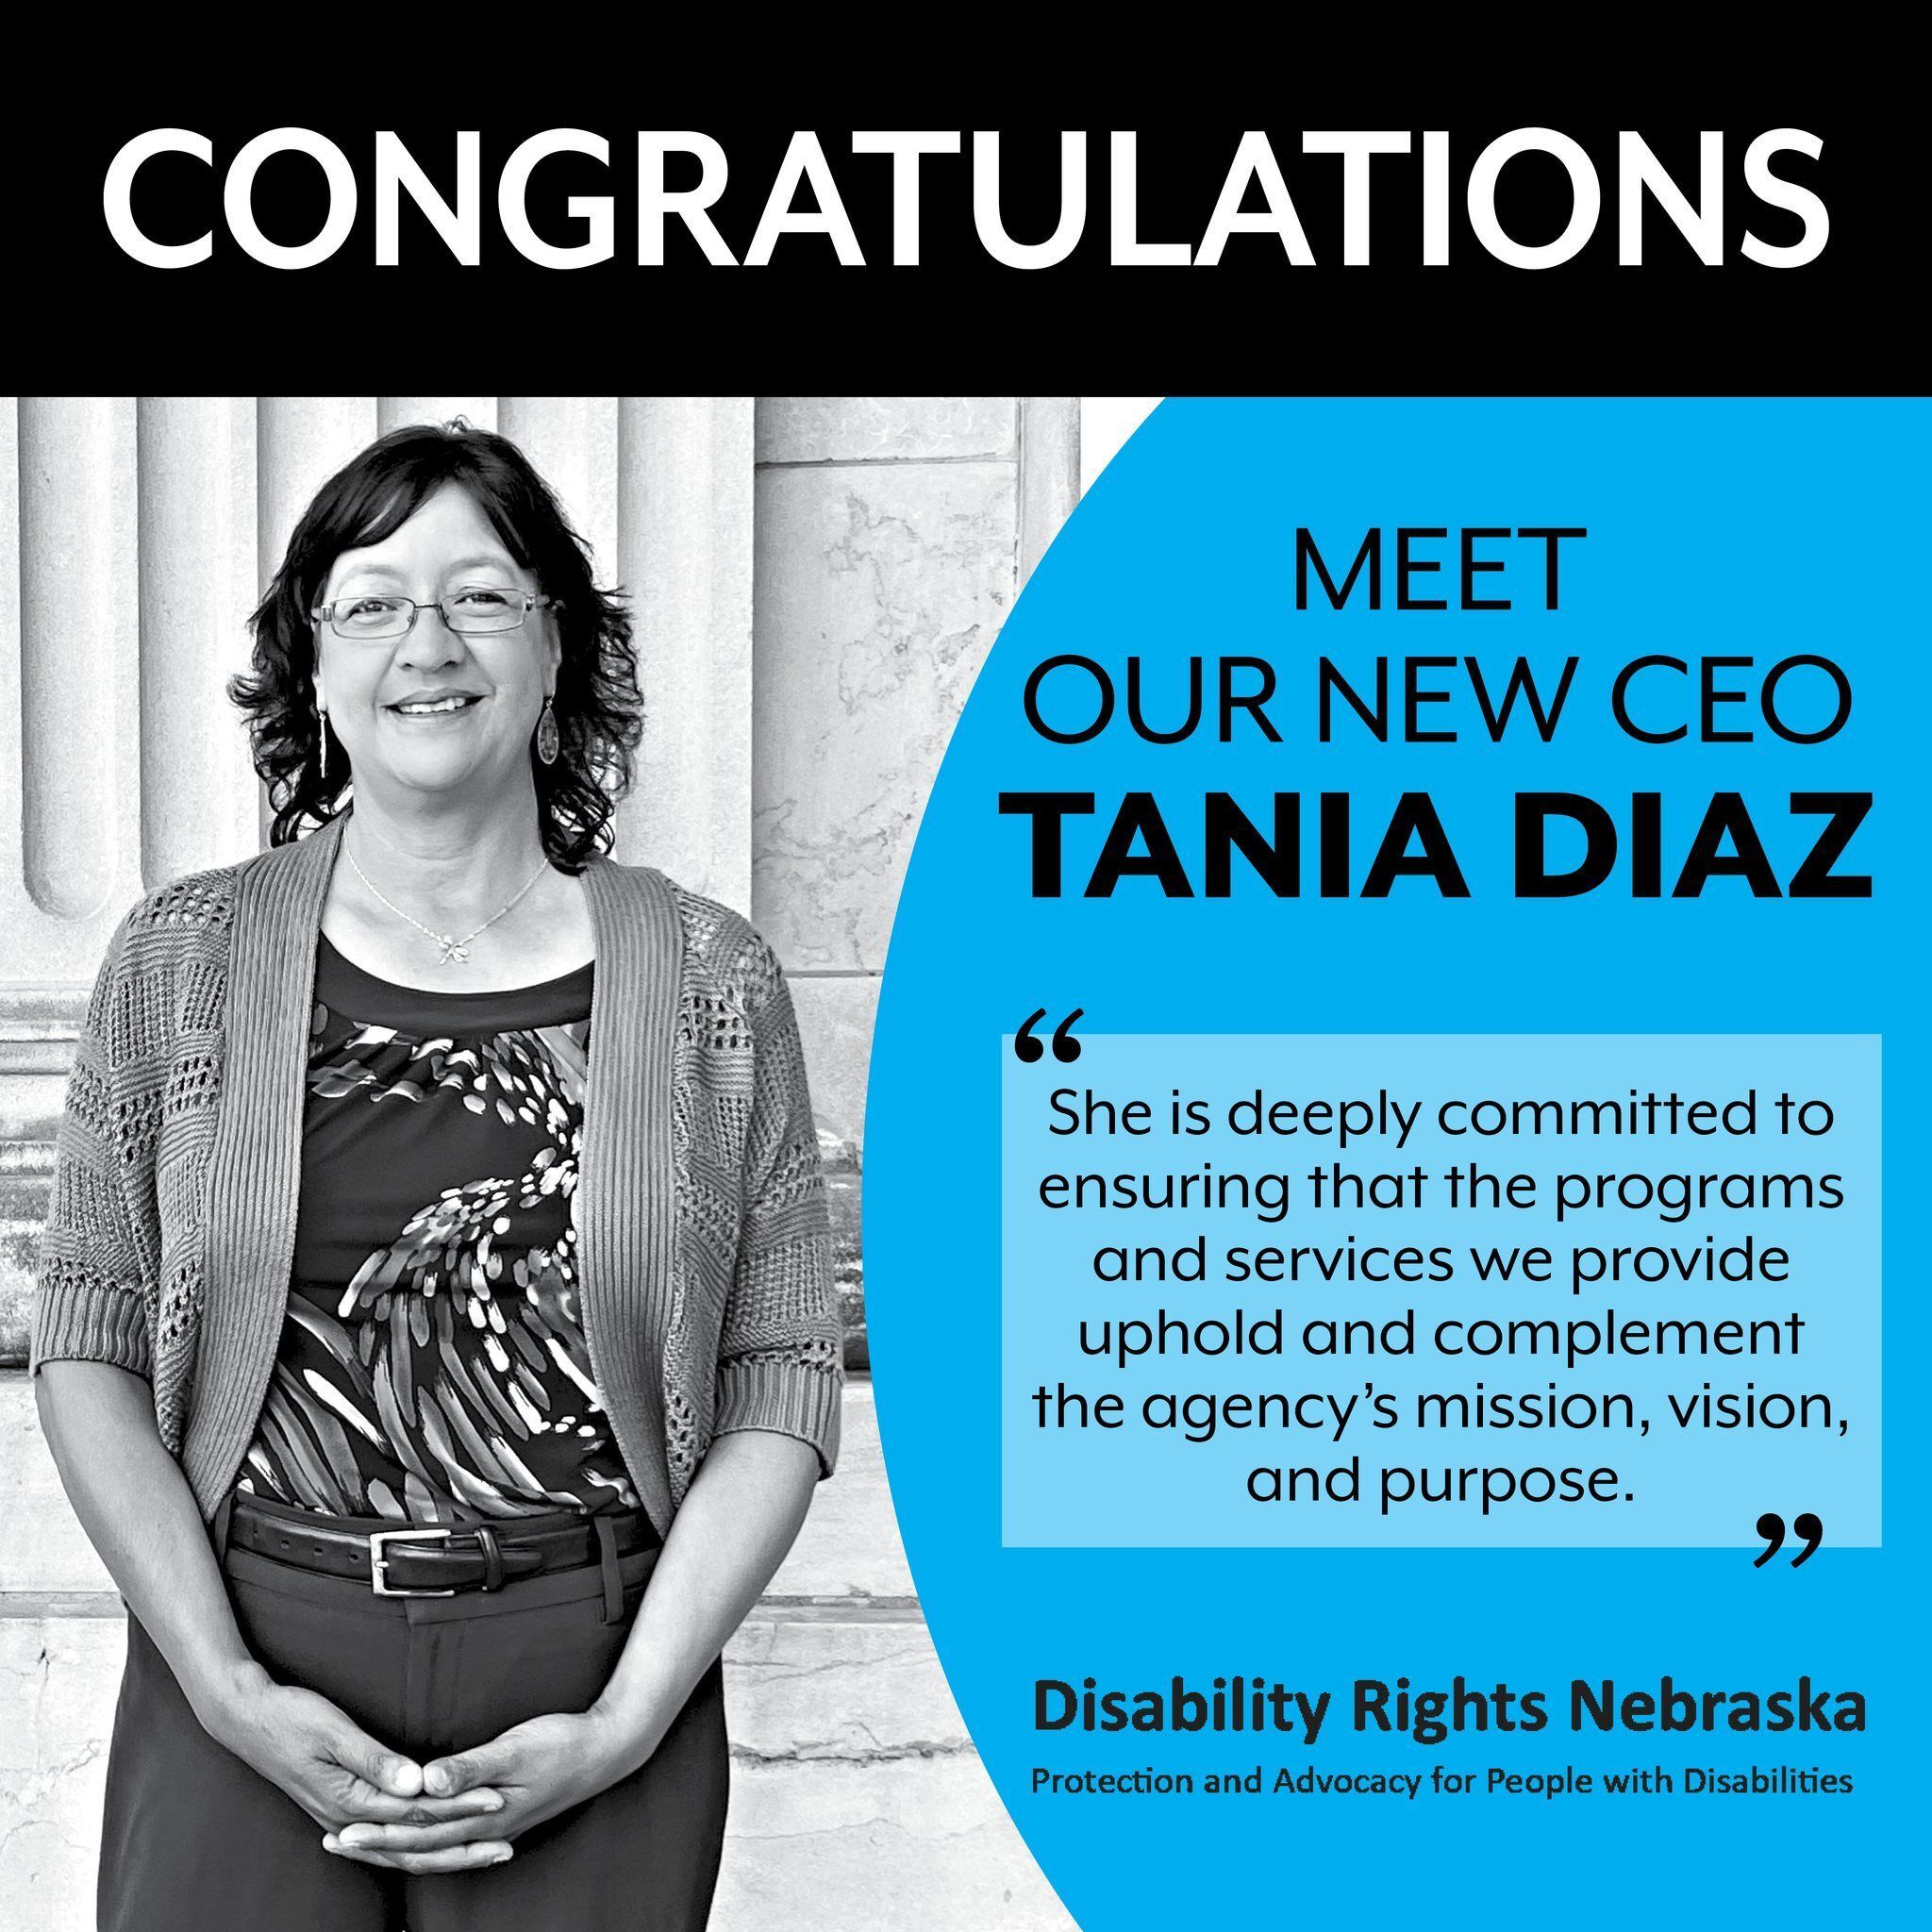 Congratulations! Meet our new CEO Tania Diaz with an image of Tania in black and white.